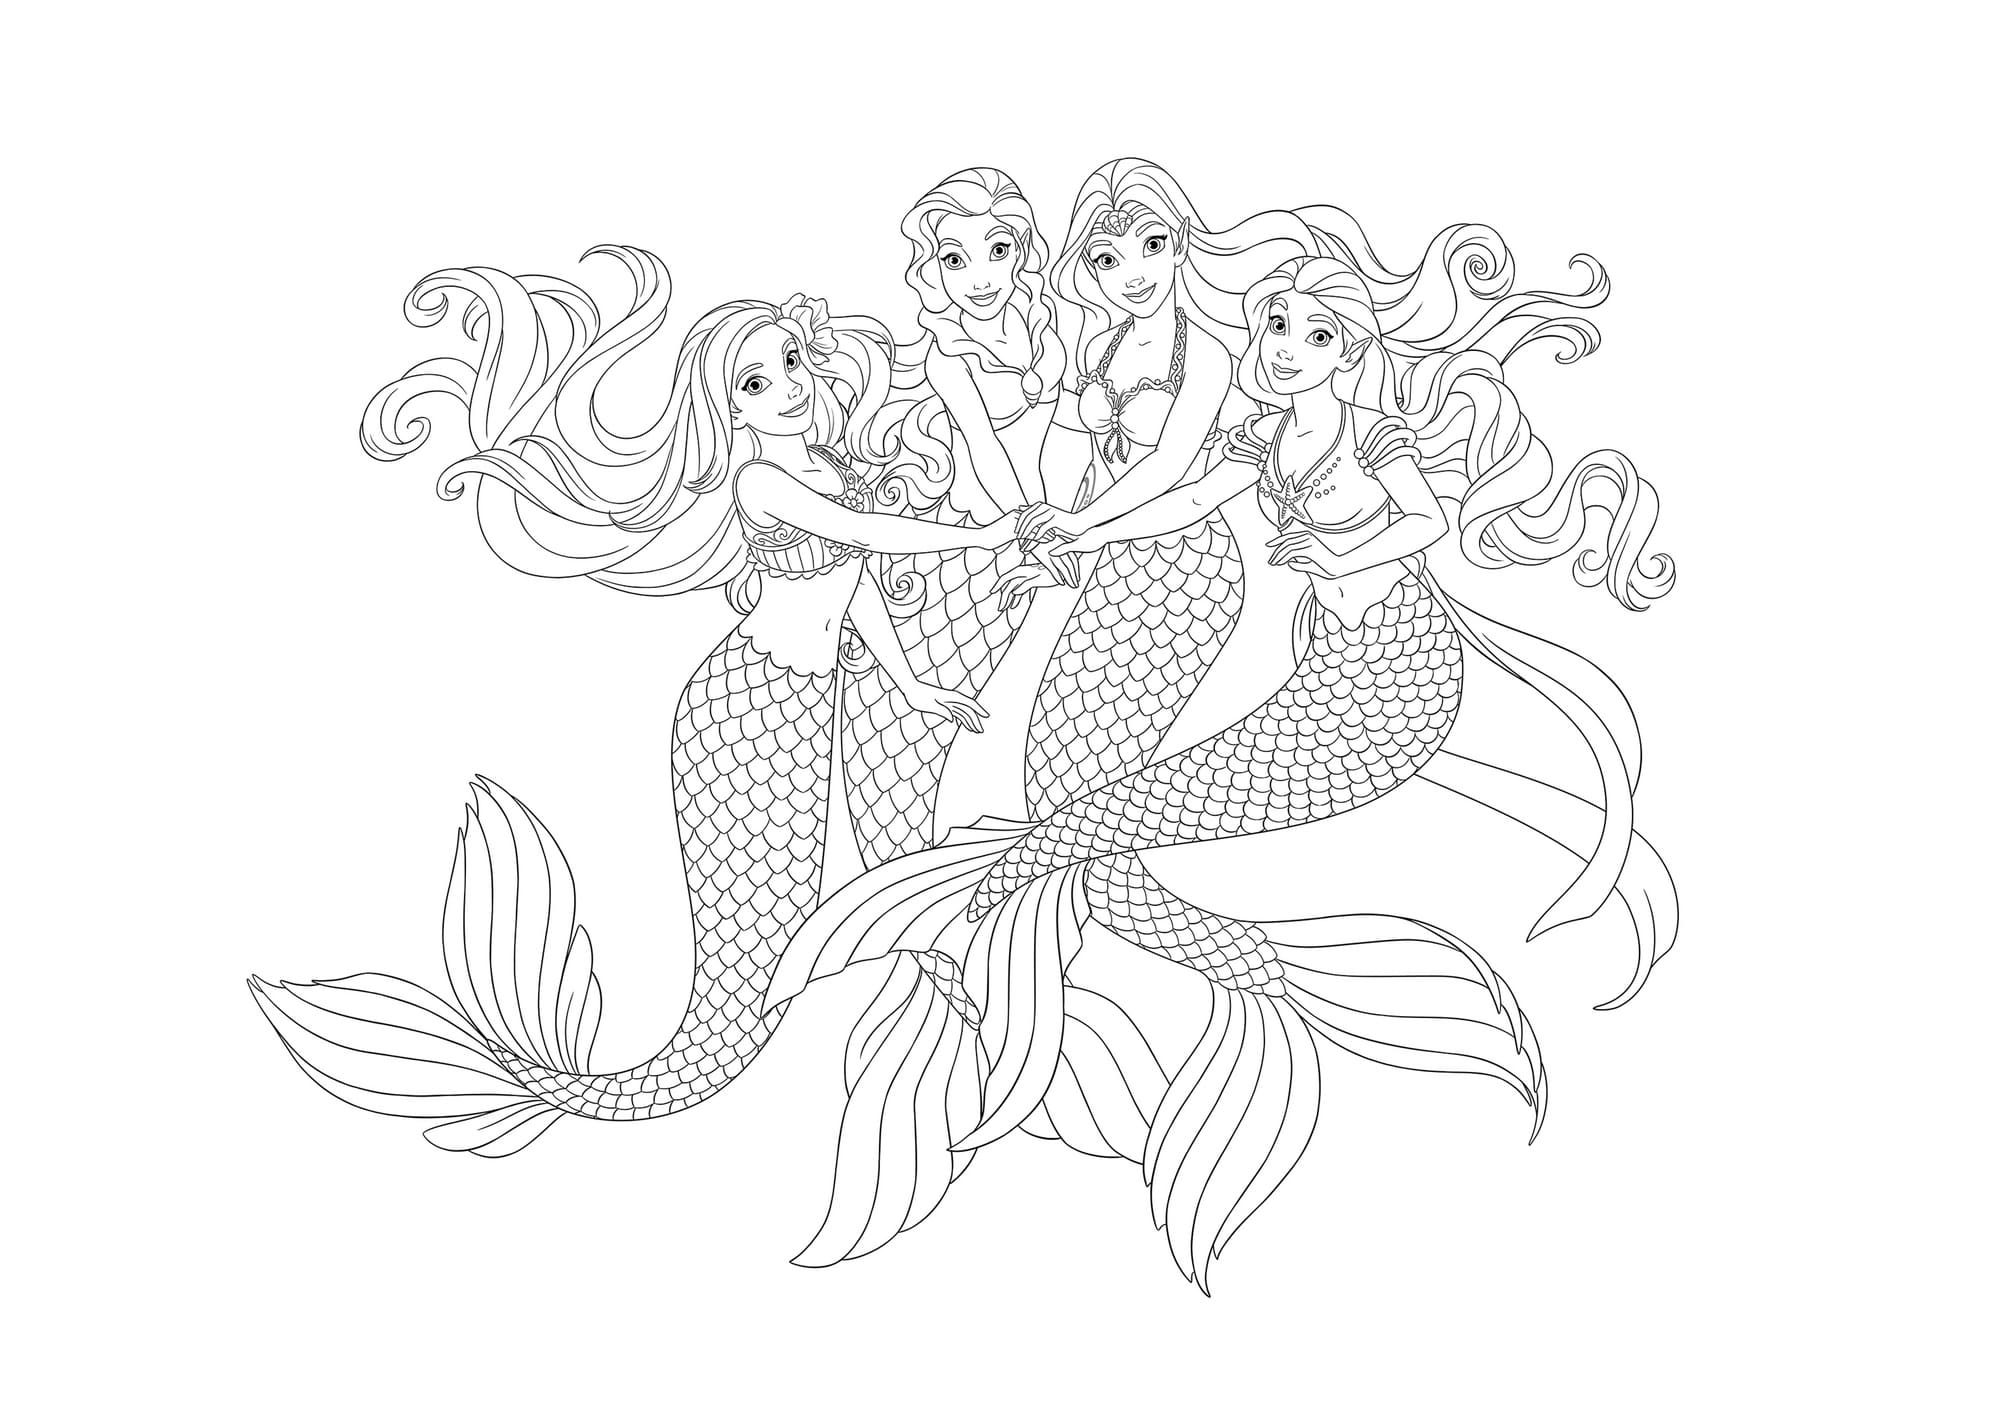 Coloring page Barbie Mermaid Dolls for girls